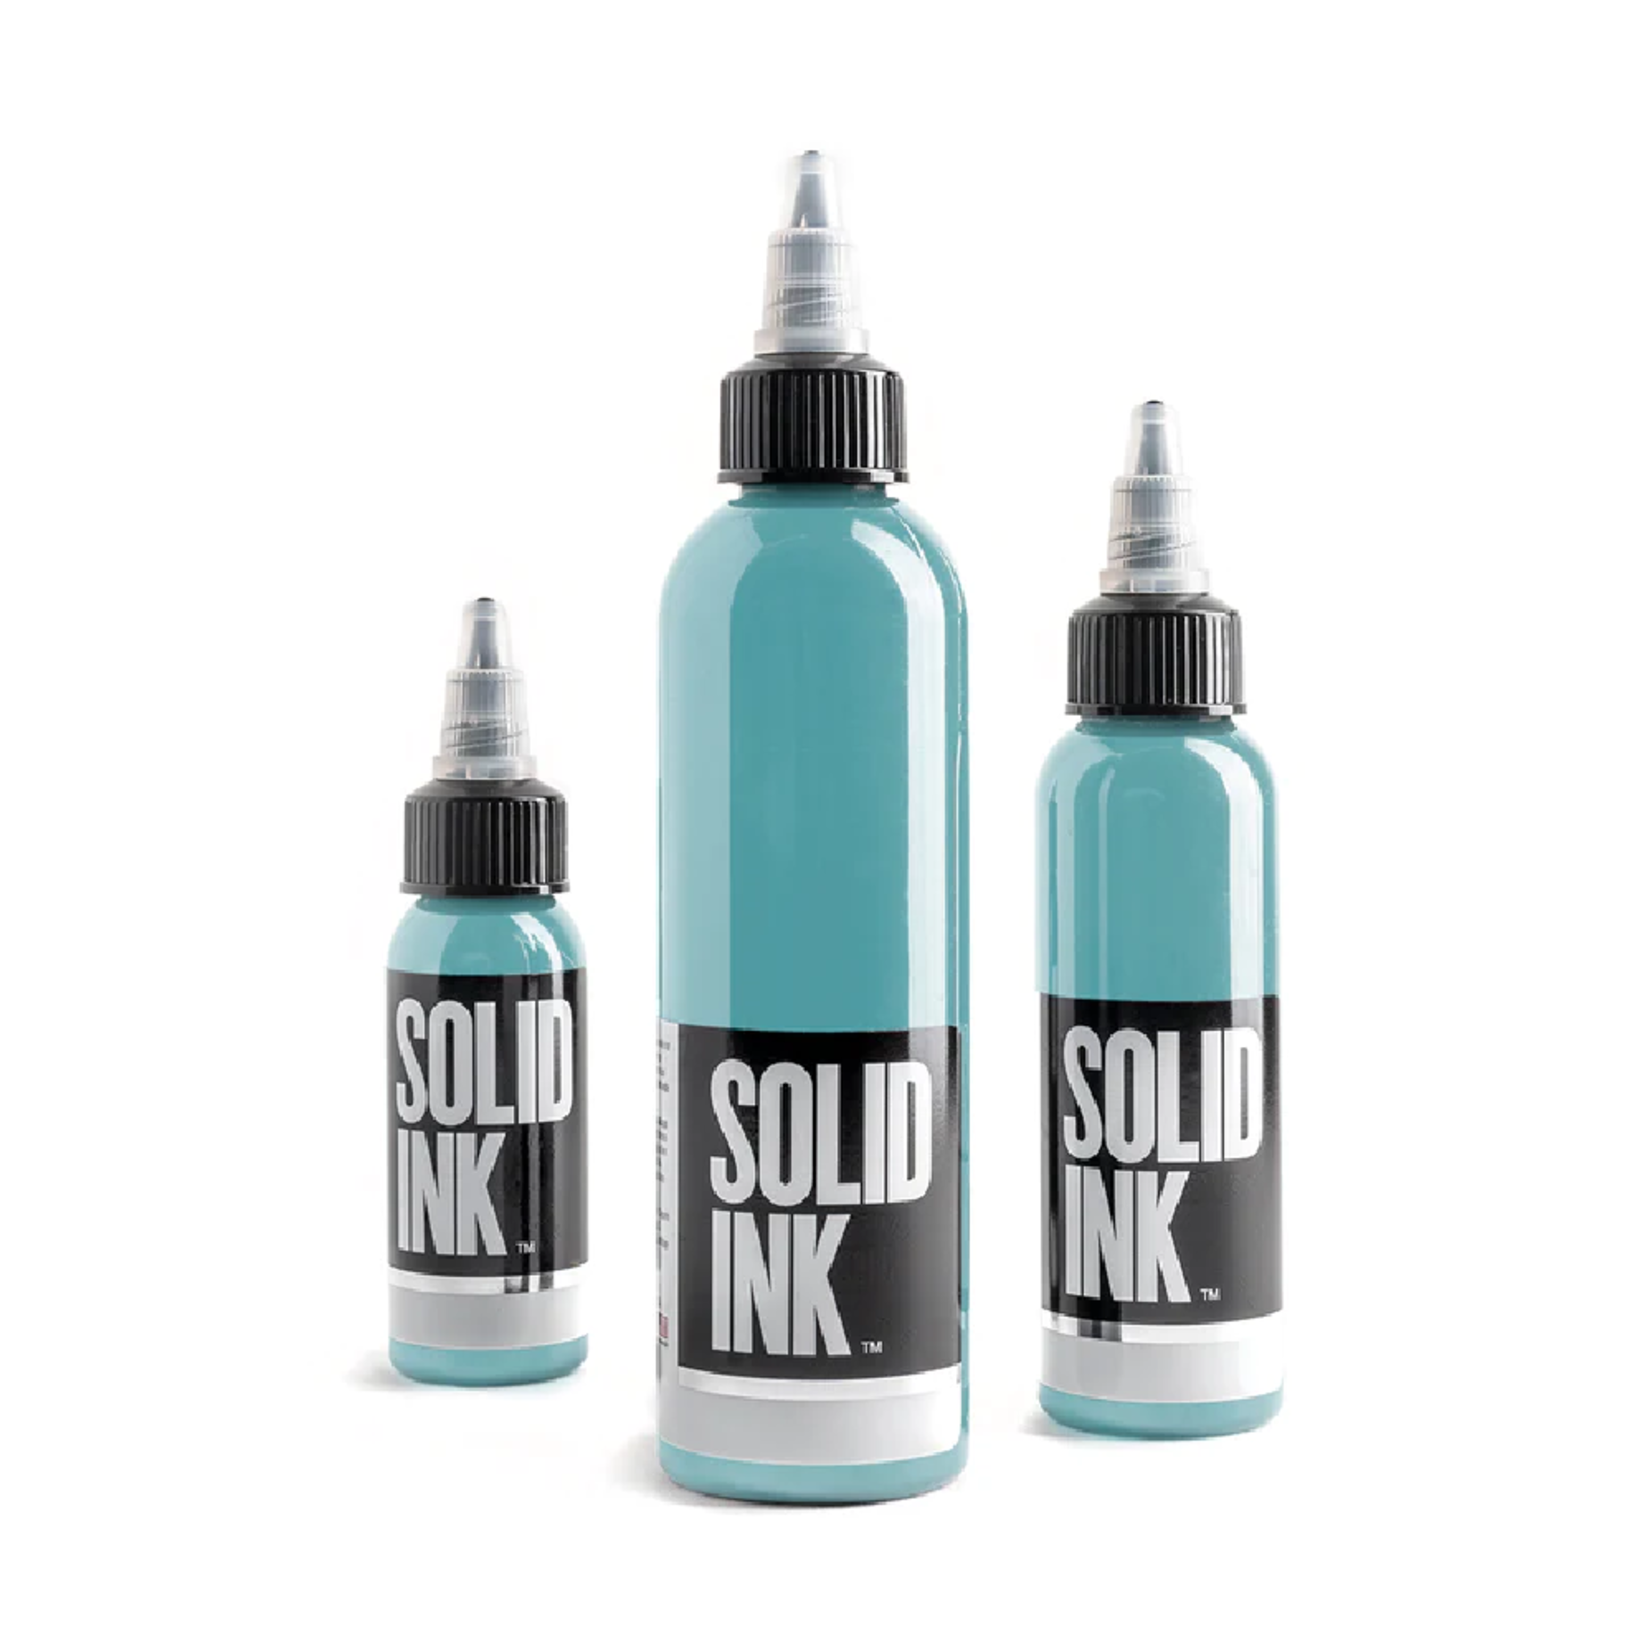 SOLID INK DOLPHIN 1OZ BOTTLE